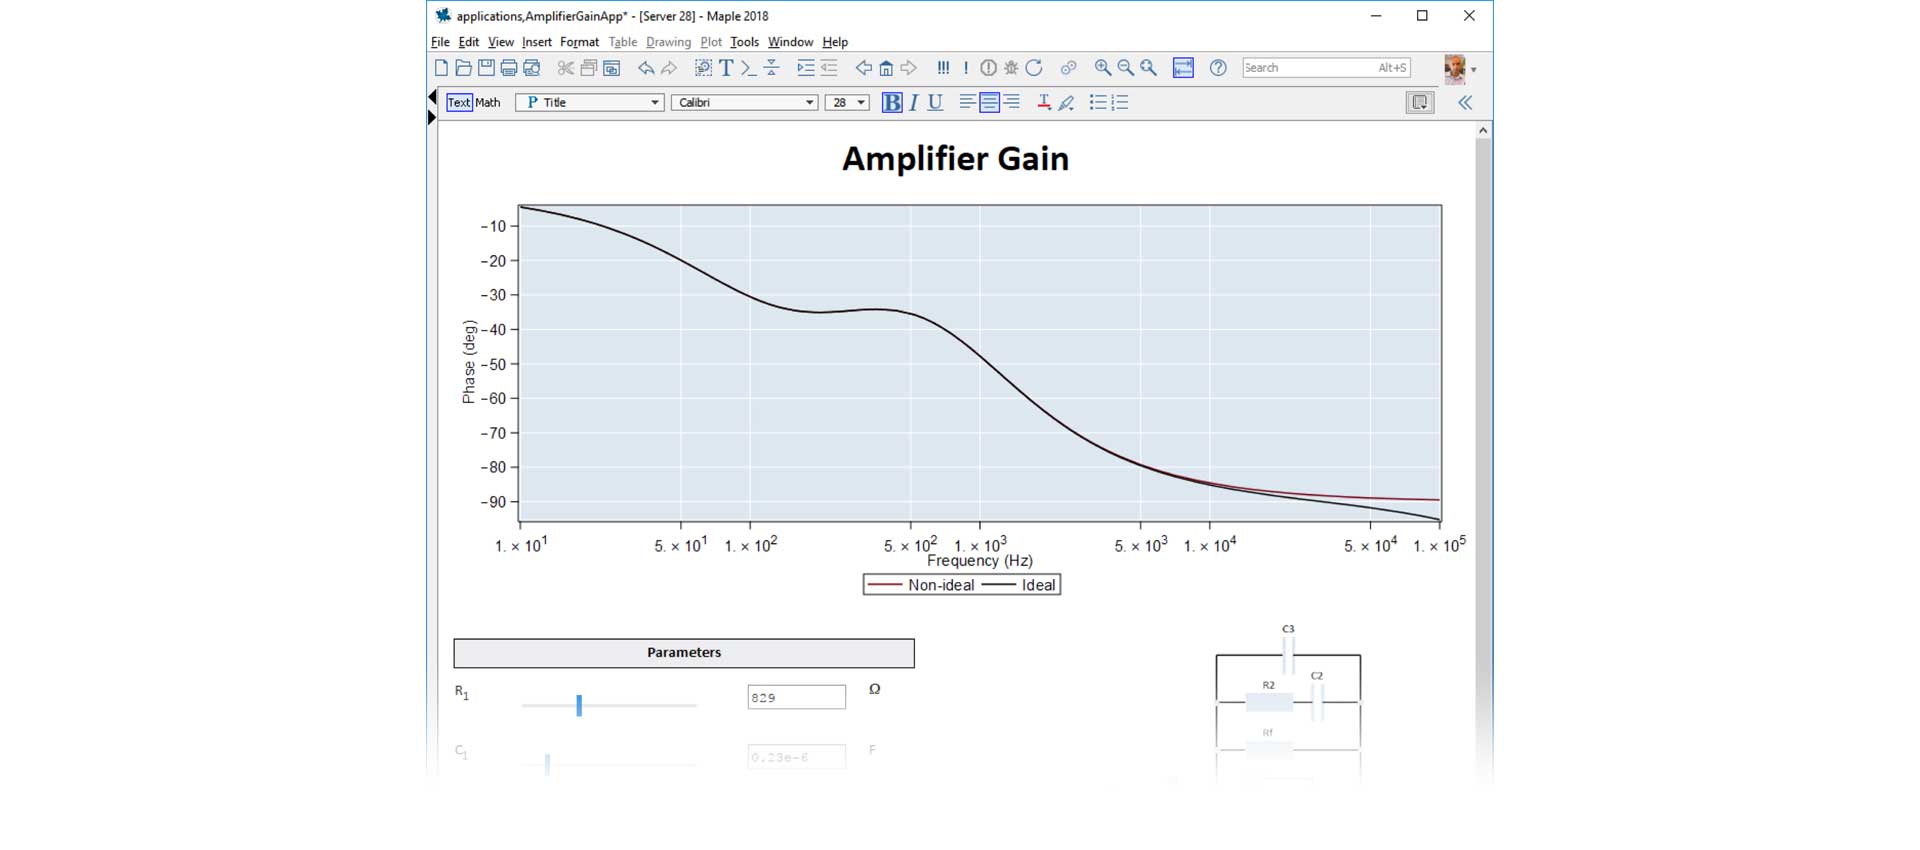 Deployable application for analyzing the gain of an amplifier